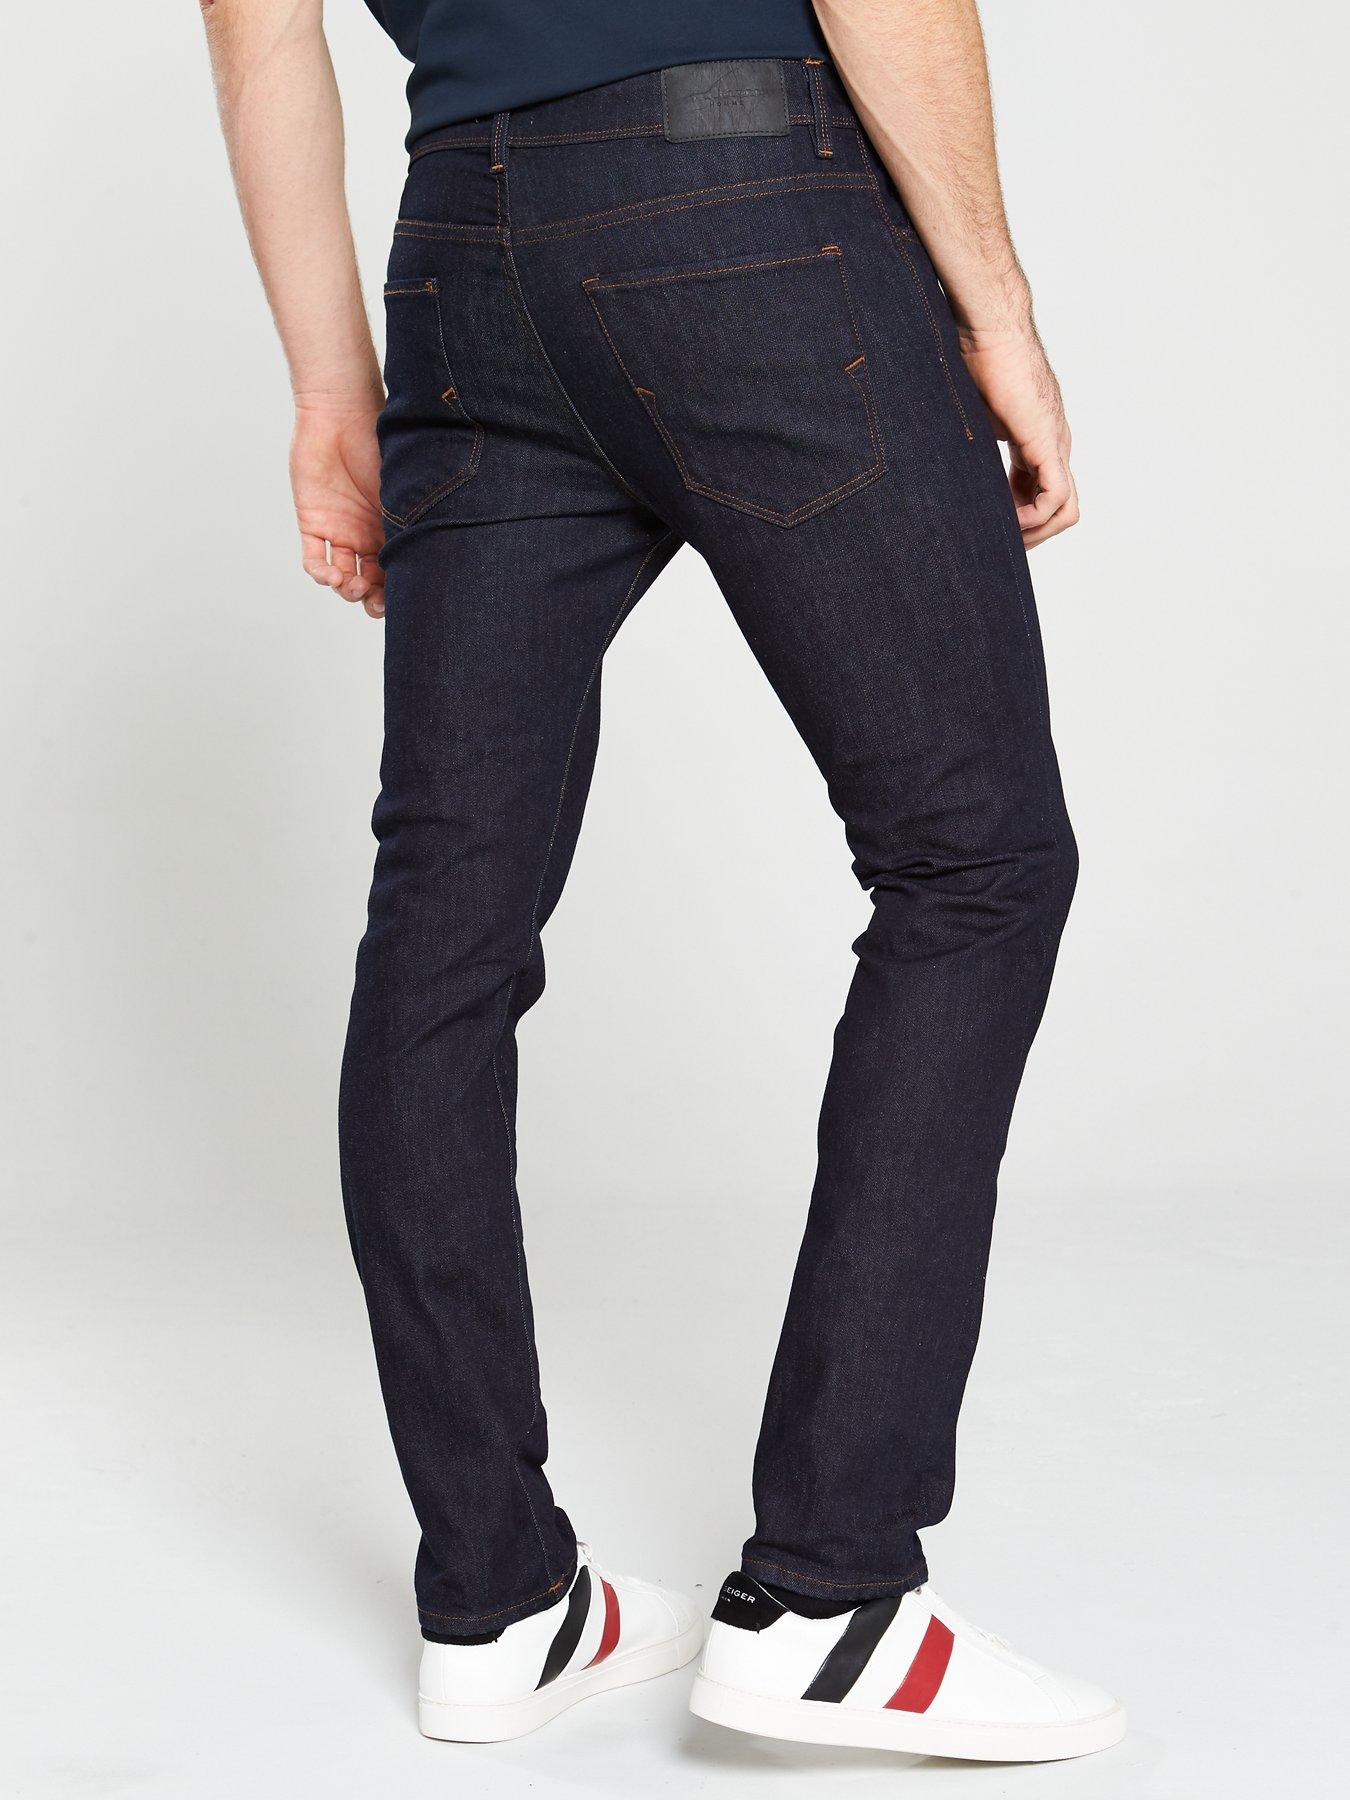 jeans selected homme indigo